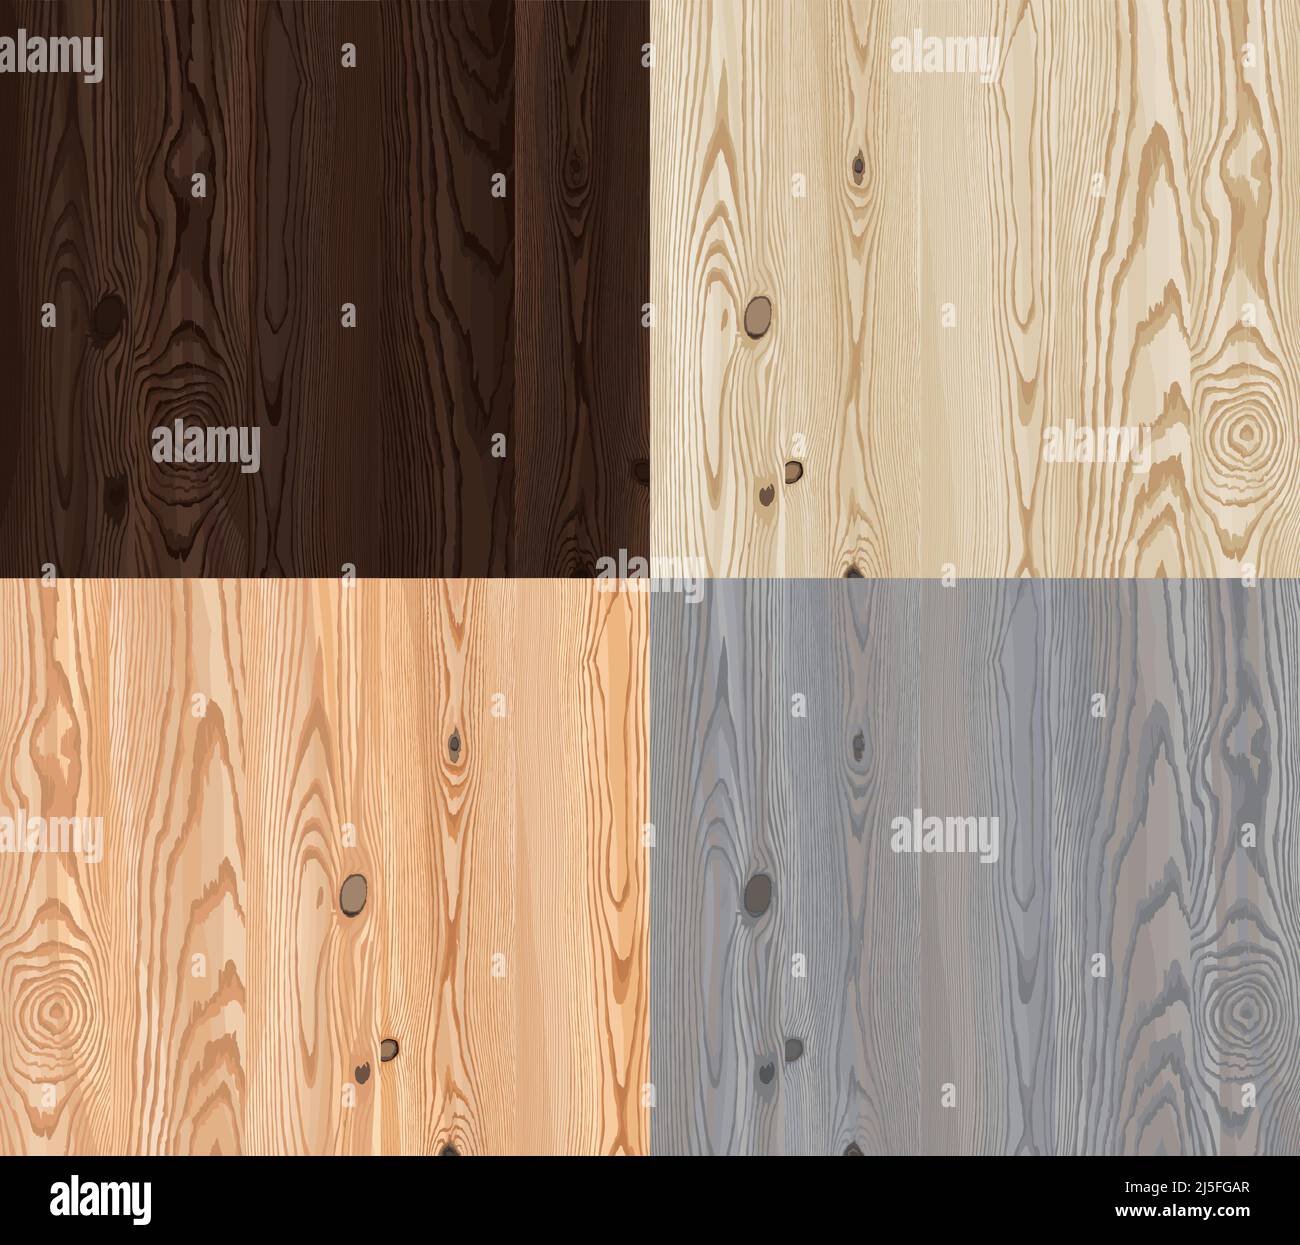 Set of vector wooden texture with natural pattern of different colors. Realistic style Stock Vector